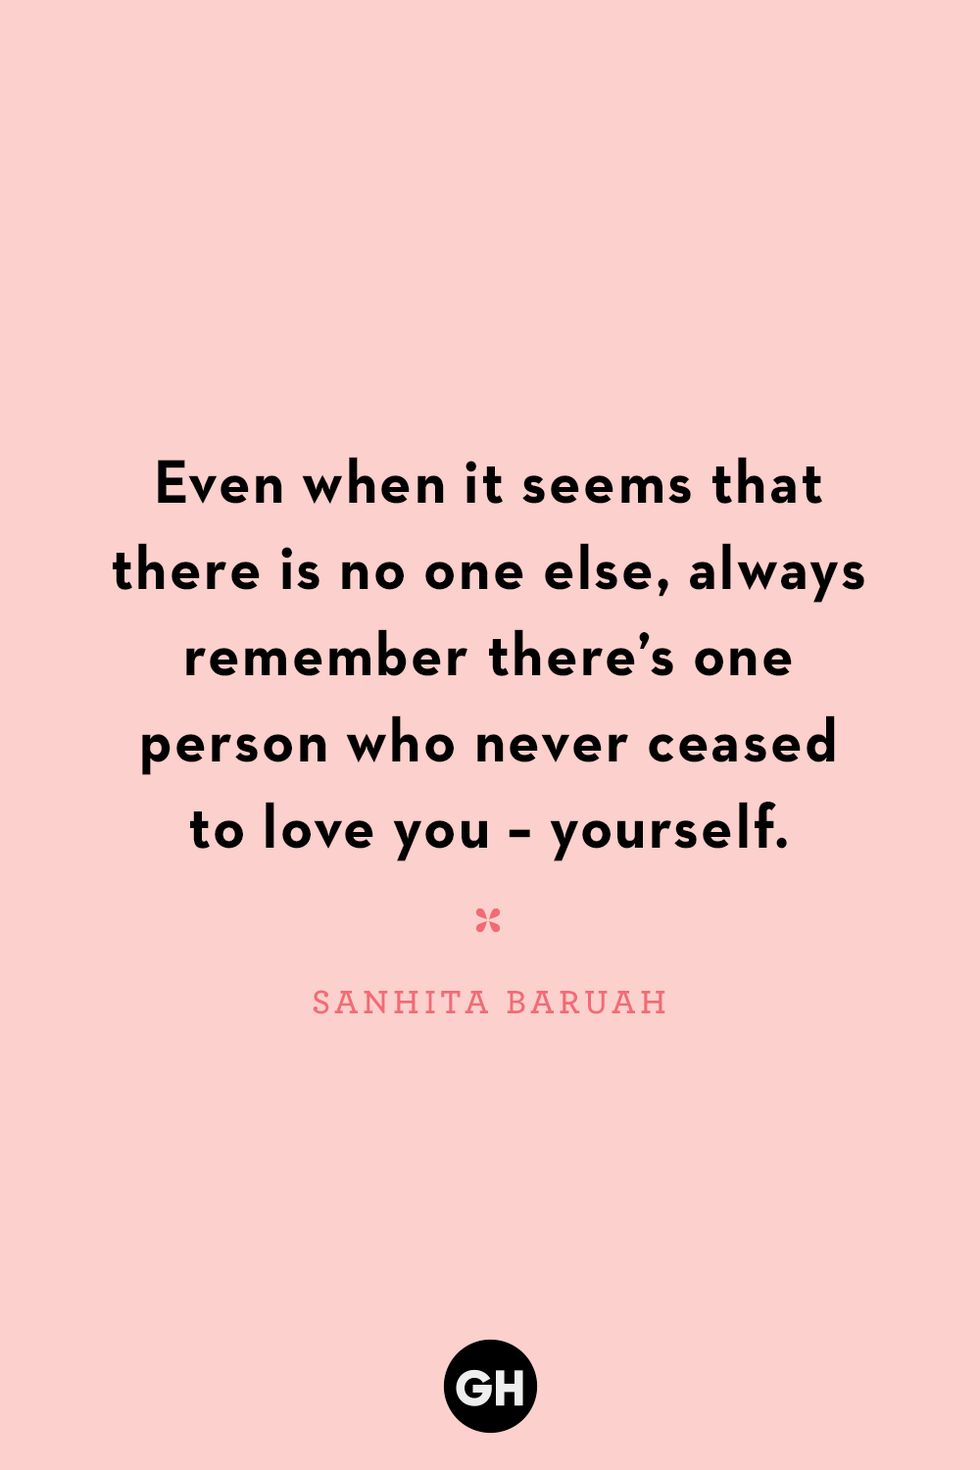 15 Quotes About Self-love for Strong Women to Remember